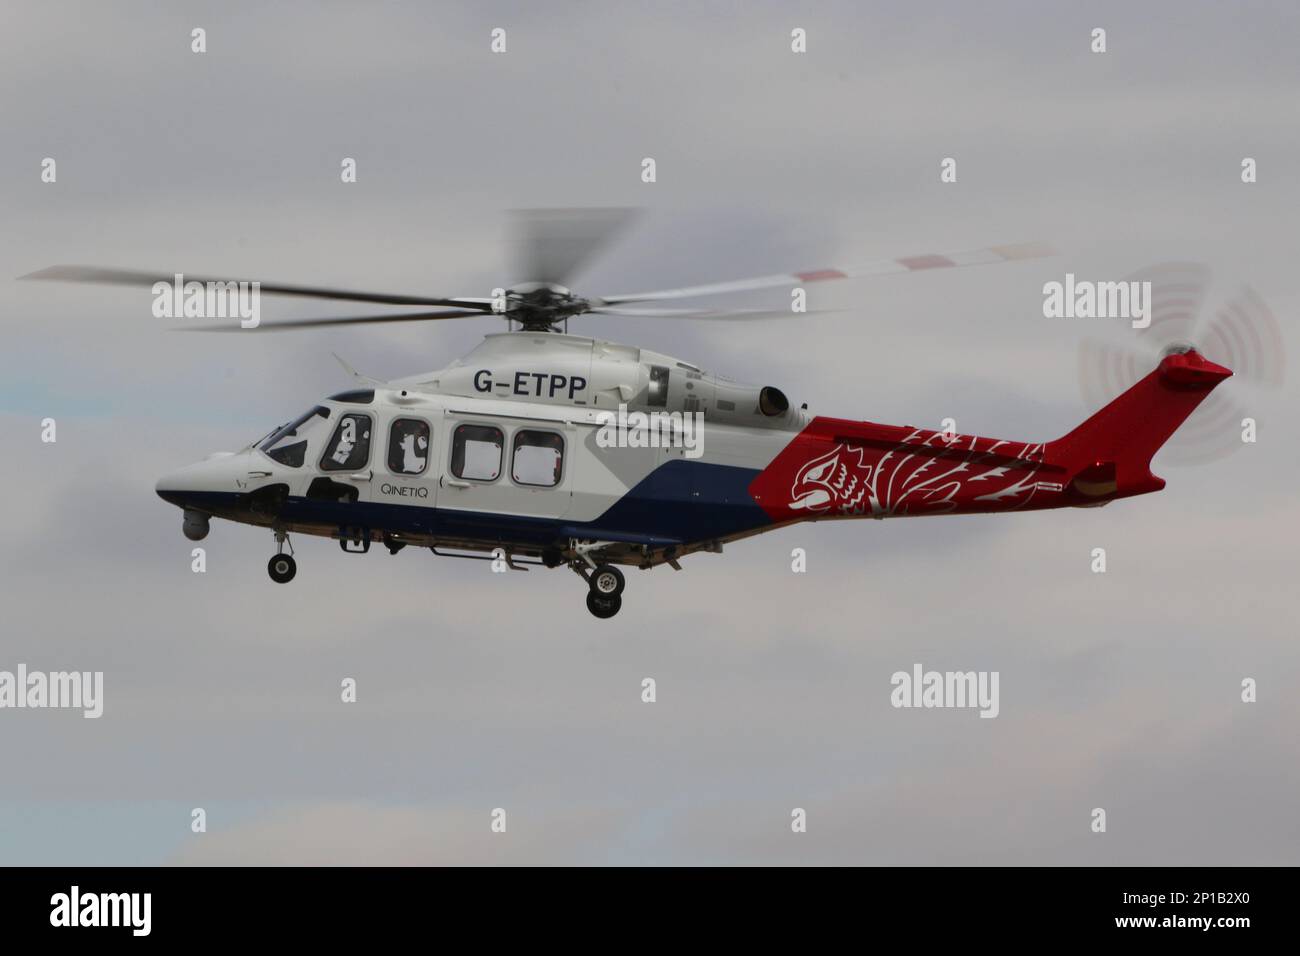 G-ETPP, an AgustaWestland AW139 helicopter operated by QinetiQ/Empire Test Pilots School in partnership with the UK Ministry of Defence, on arrival for the Royal International Air Tattoo 2022, held at RAF Fairford in Gloucestershire, England. Stock Photo